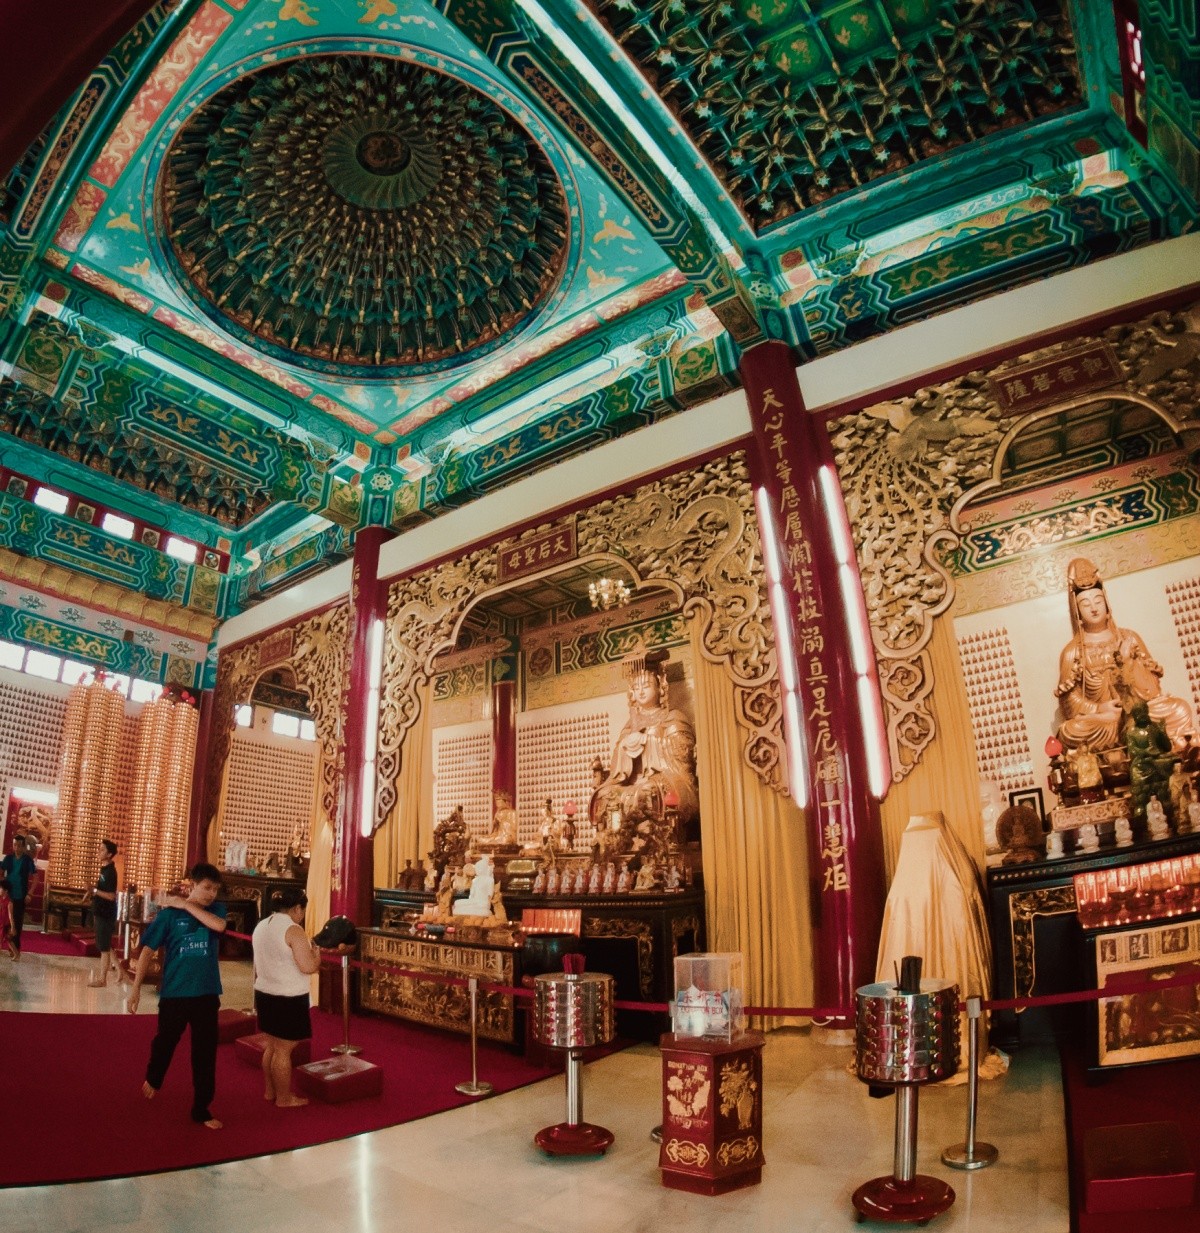 Interior picture of Buddhist Thean Hou temple in Kuala Lumpur